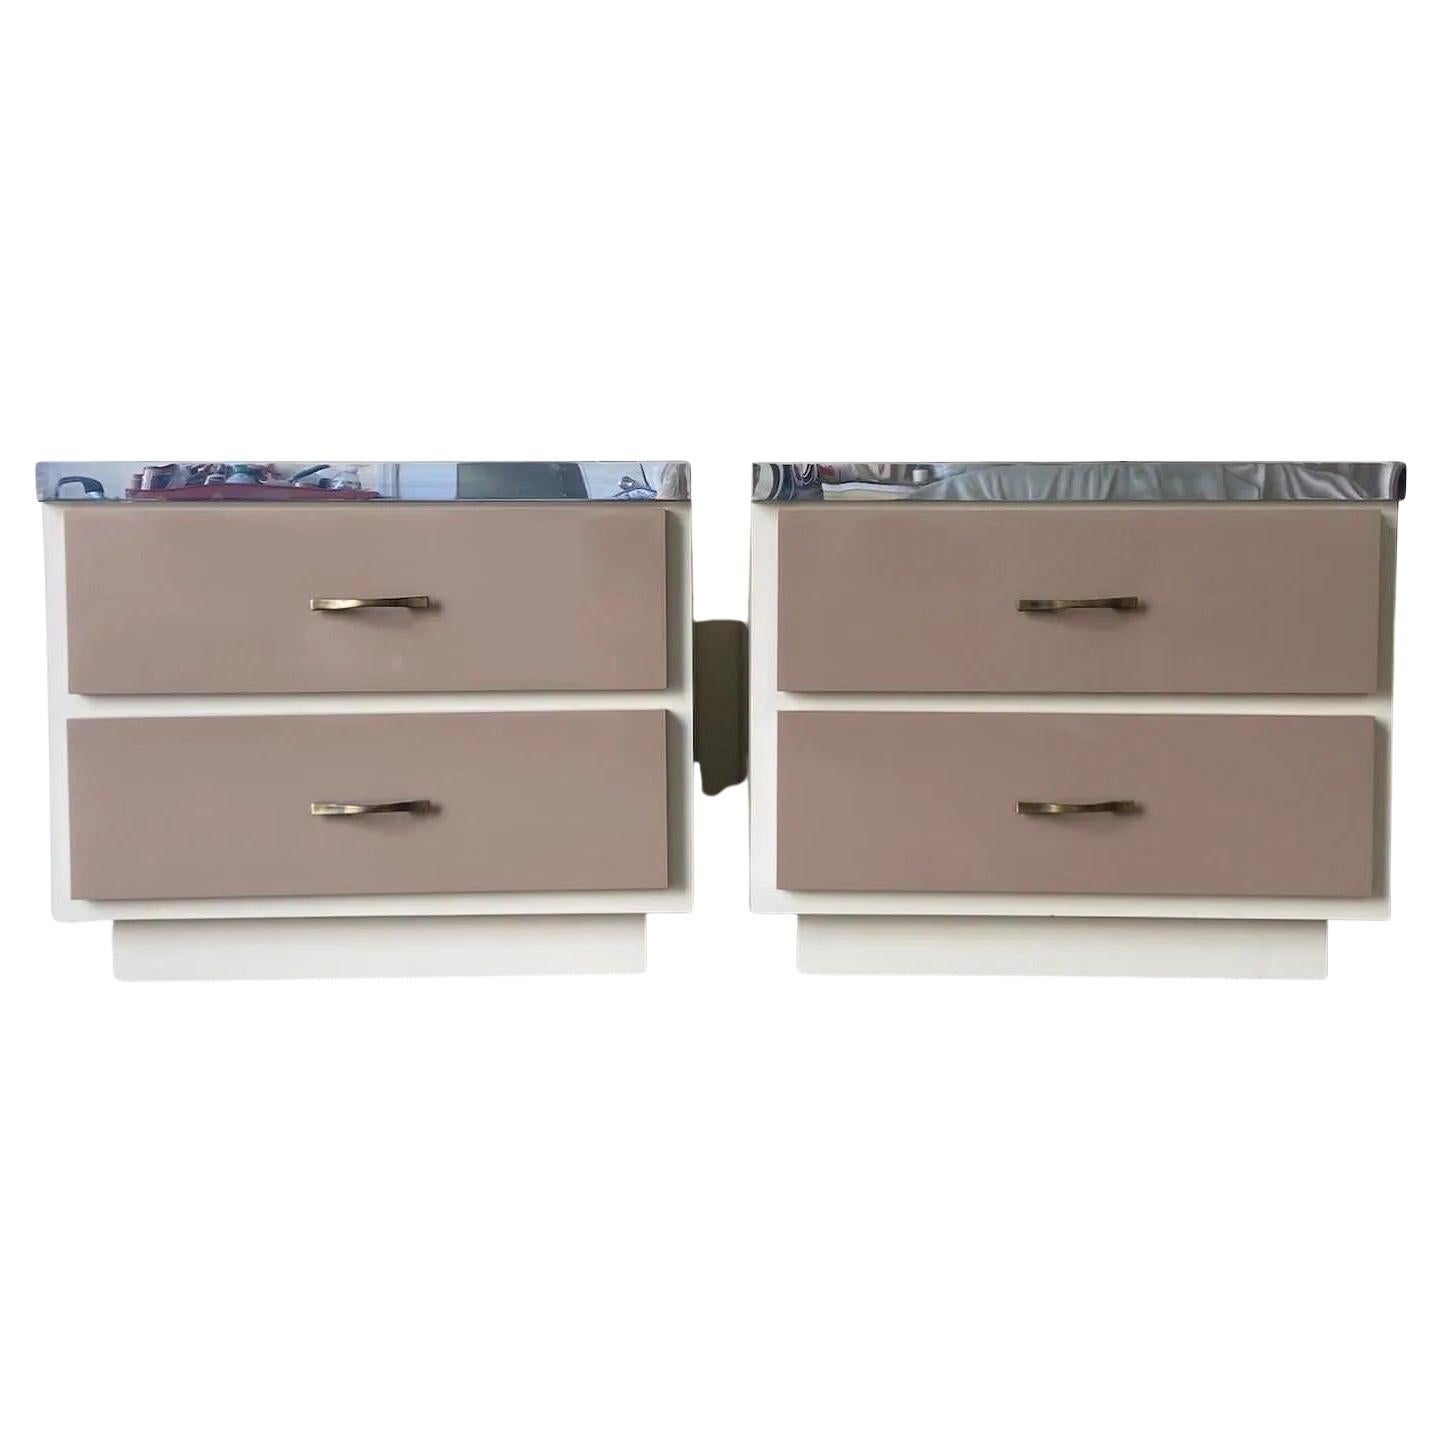 Pair of Postmodern Cream and Taupe Lacquer Laminate Nightstands